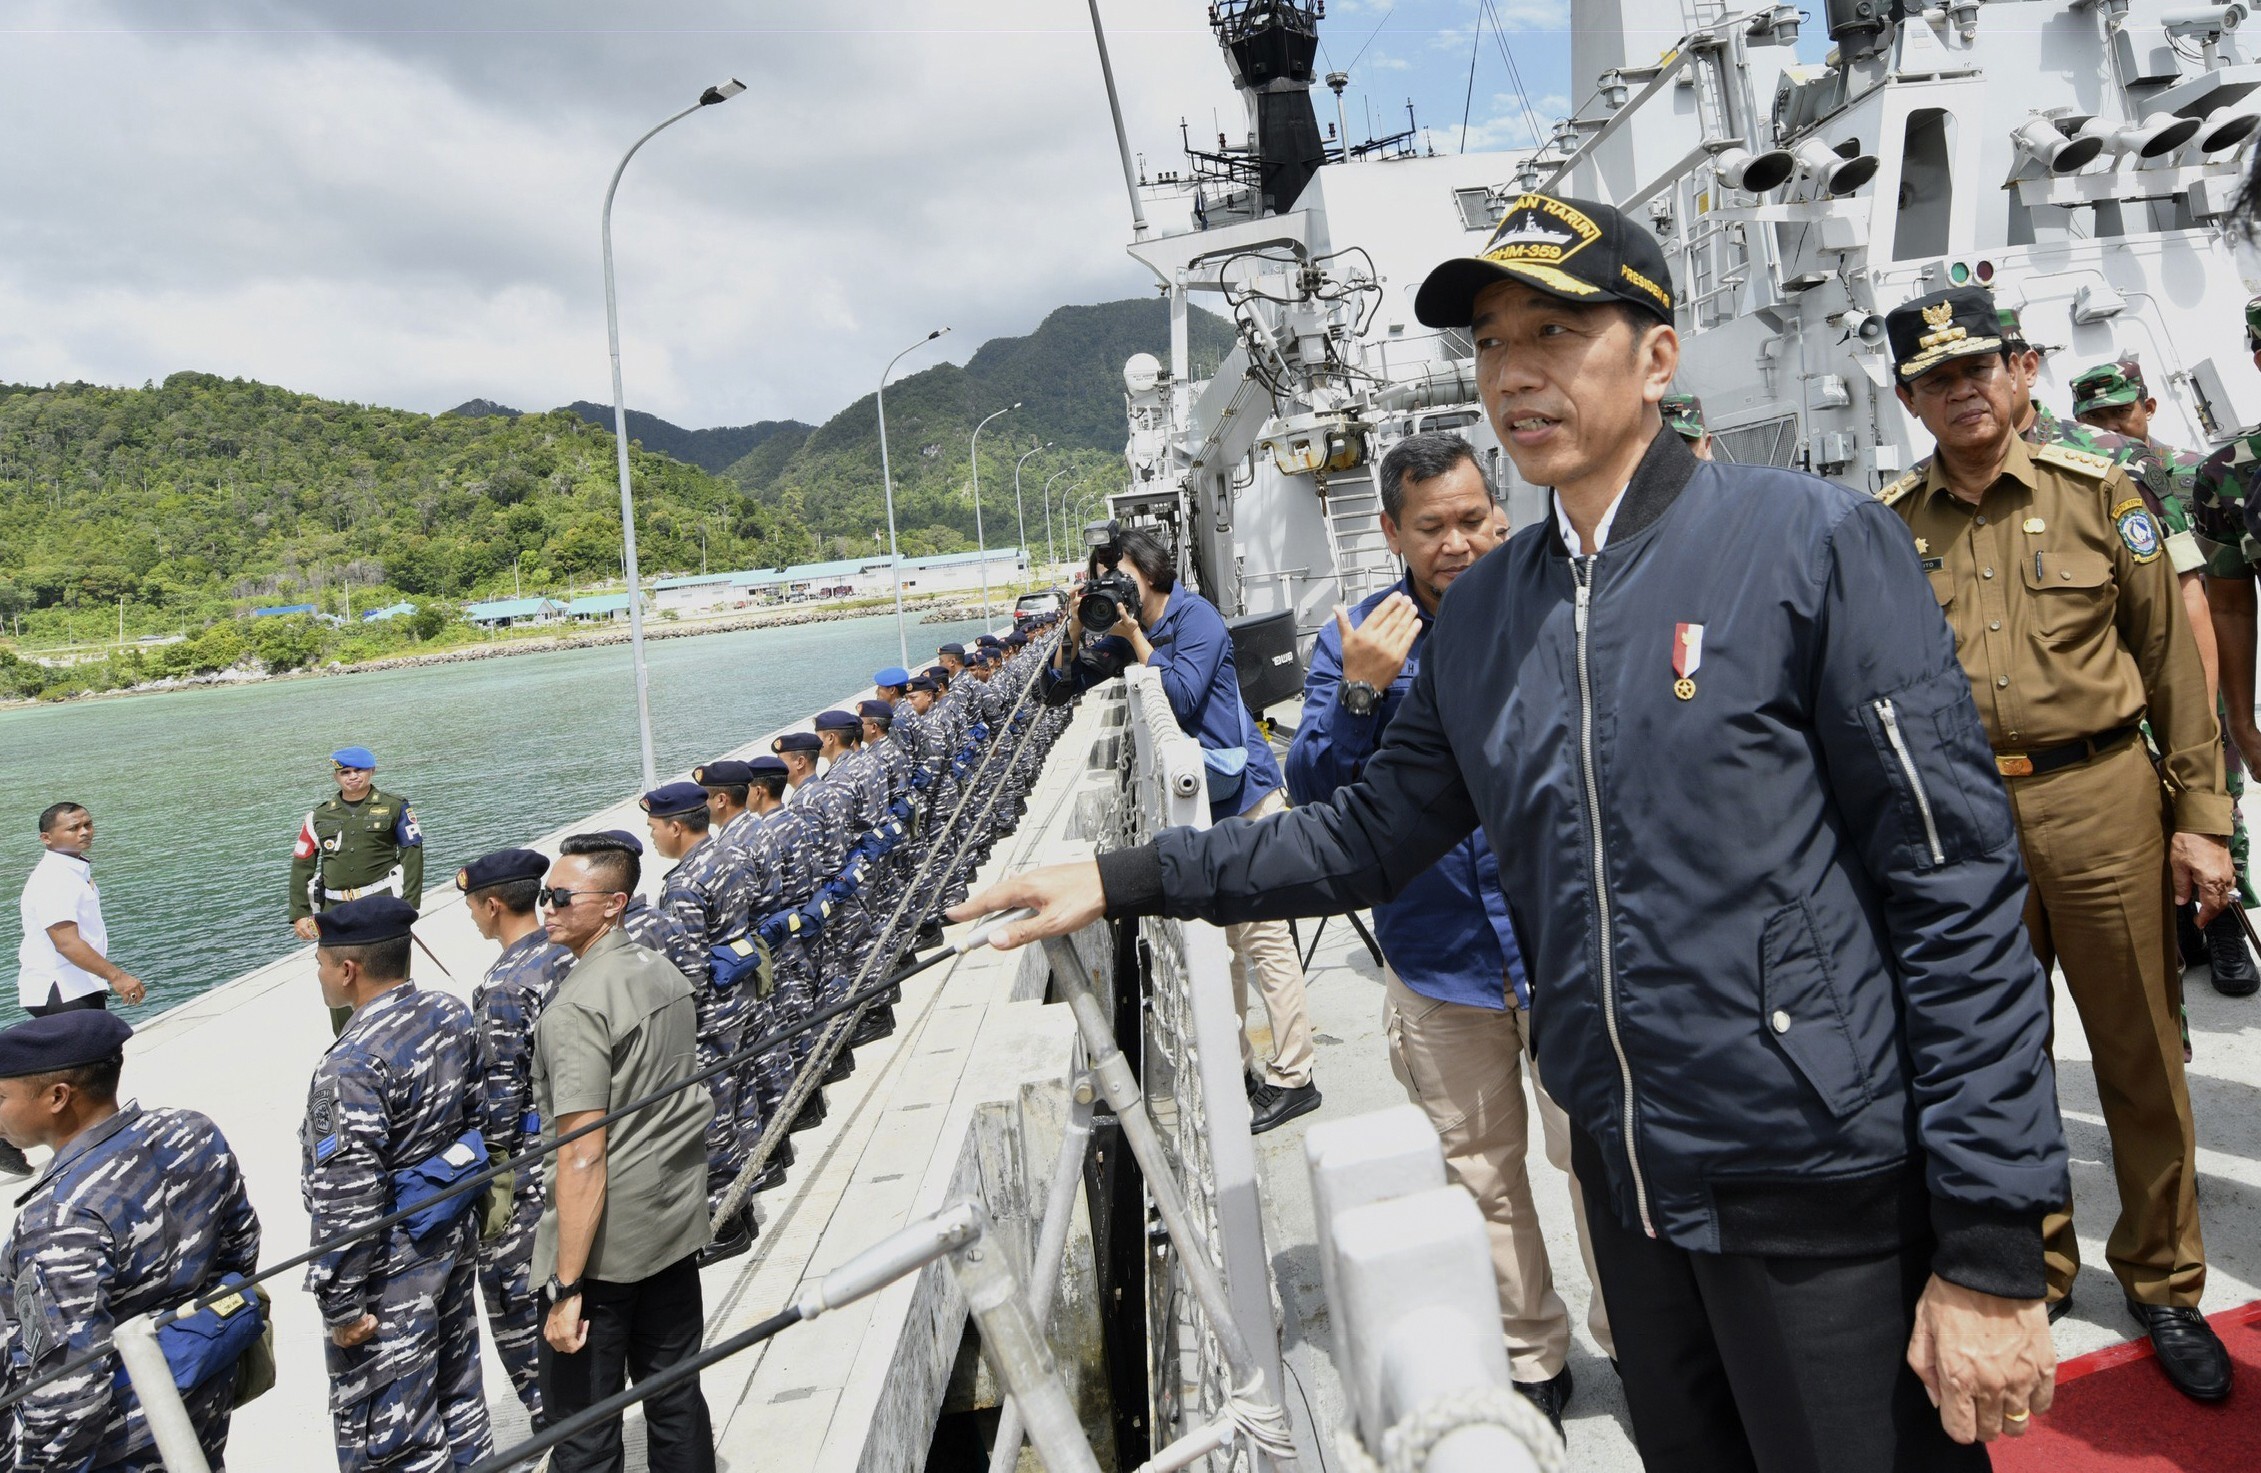 Indonesian President Joko Widodo, second right, pictured in January on the deck of an Indonesian Navy ship in the Natuna Islands, which overlap with Beijing’s expansive South China Sea claims. Photo: A